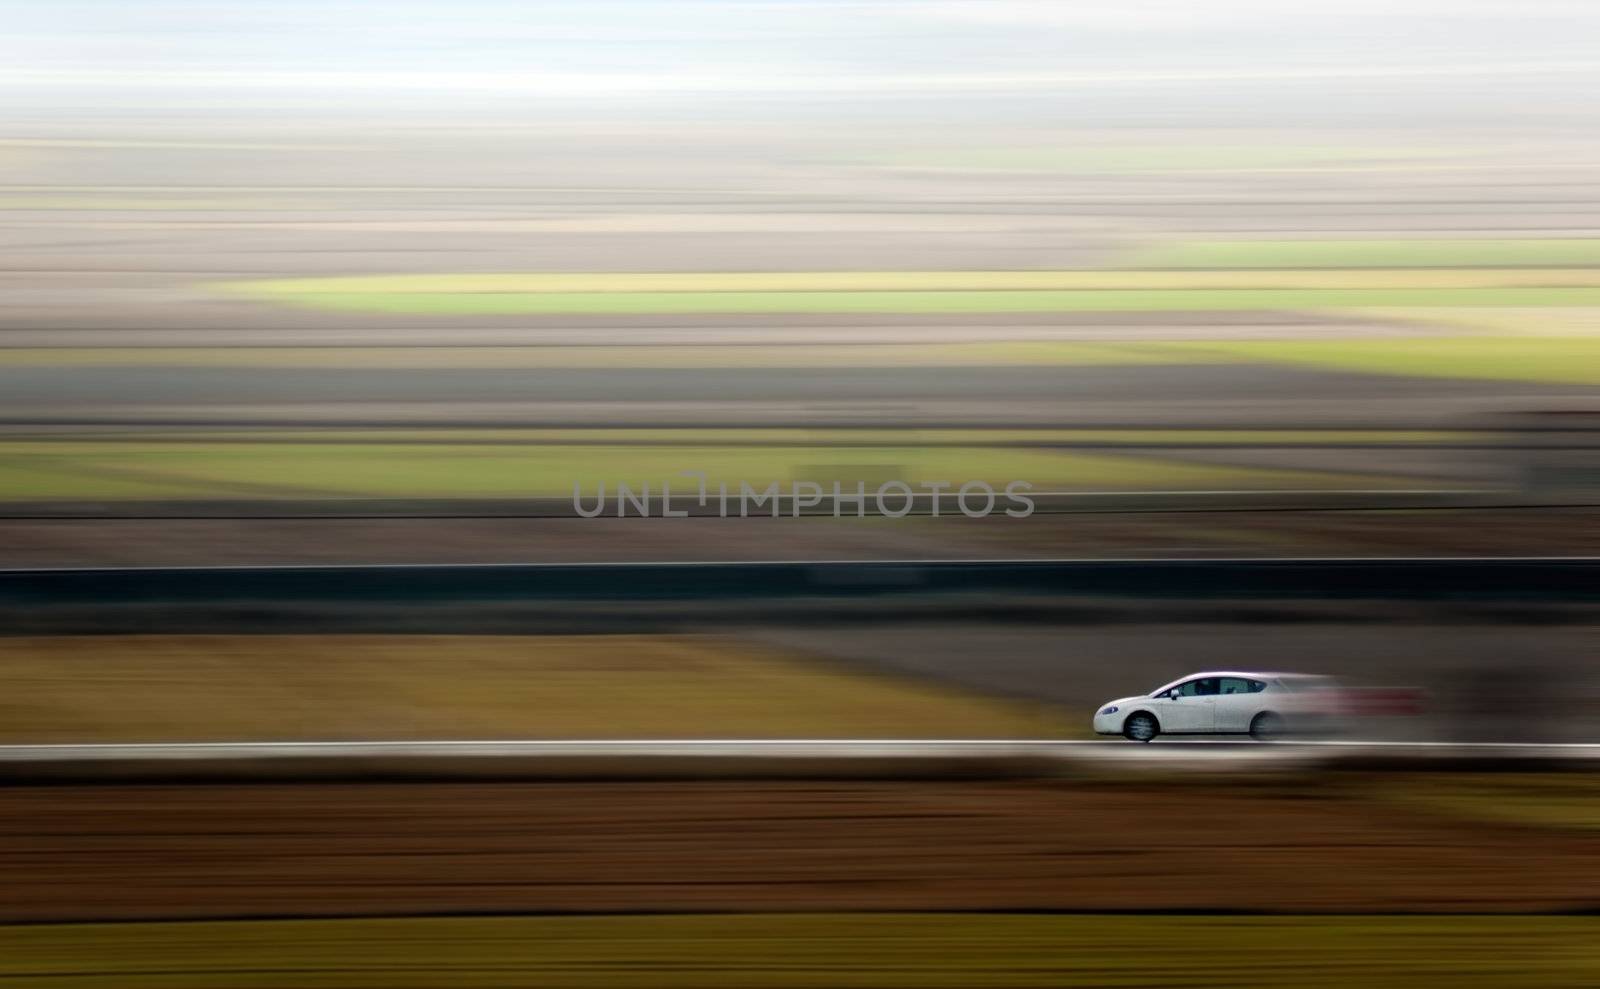 Abstract image of a car and speed